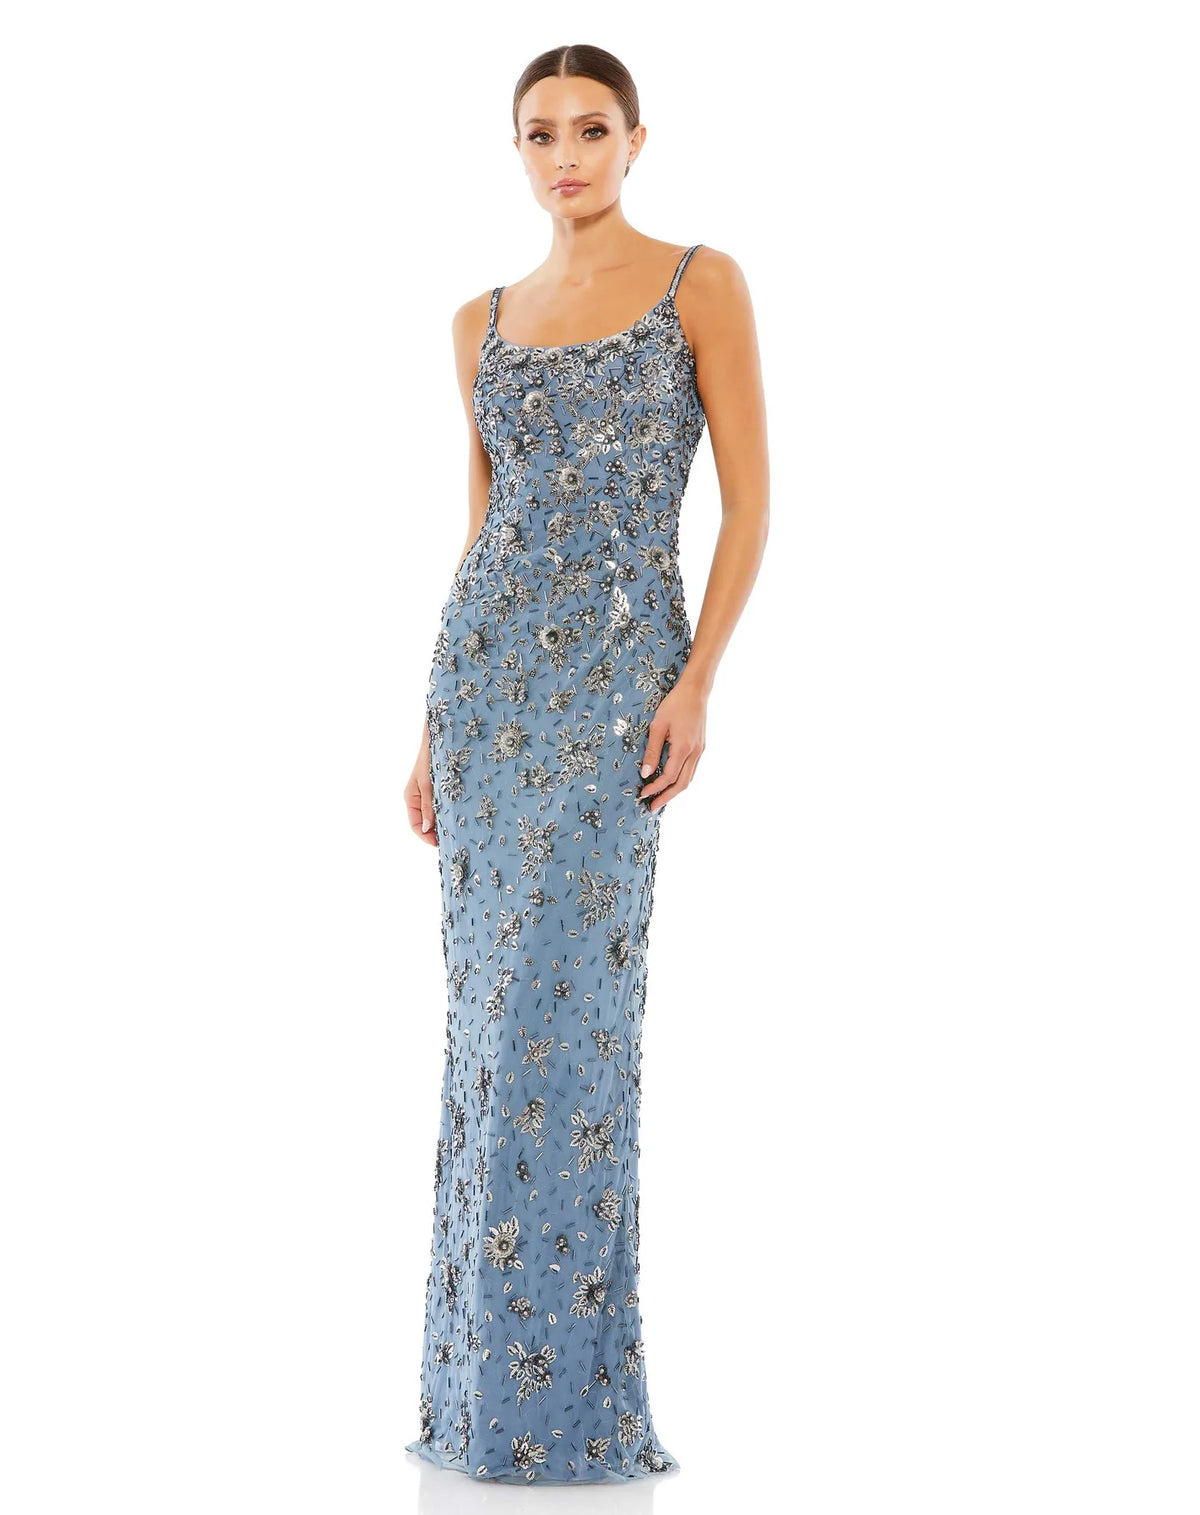 This stunningly elegant, floor-length, blue/slate grey tone evening dress is a strap sleeve column gown accented with jewel and bead embellishment. This bodycon, form-fitting evening gown is perfect for proms, black-tie affairs, weddings and special events!